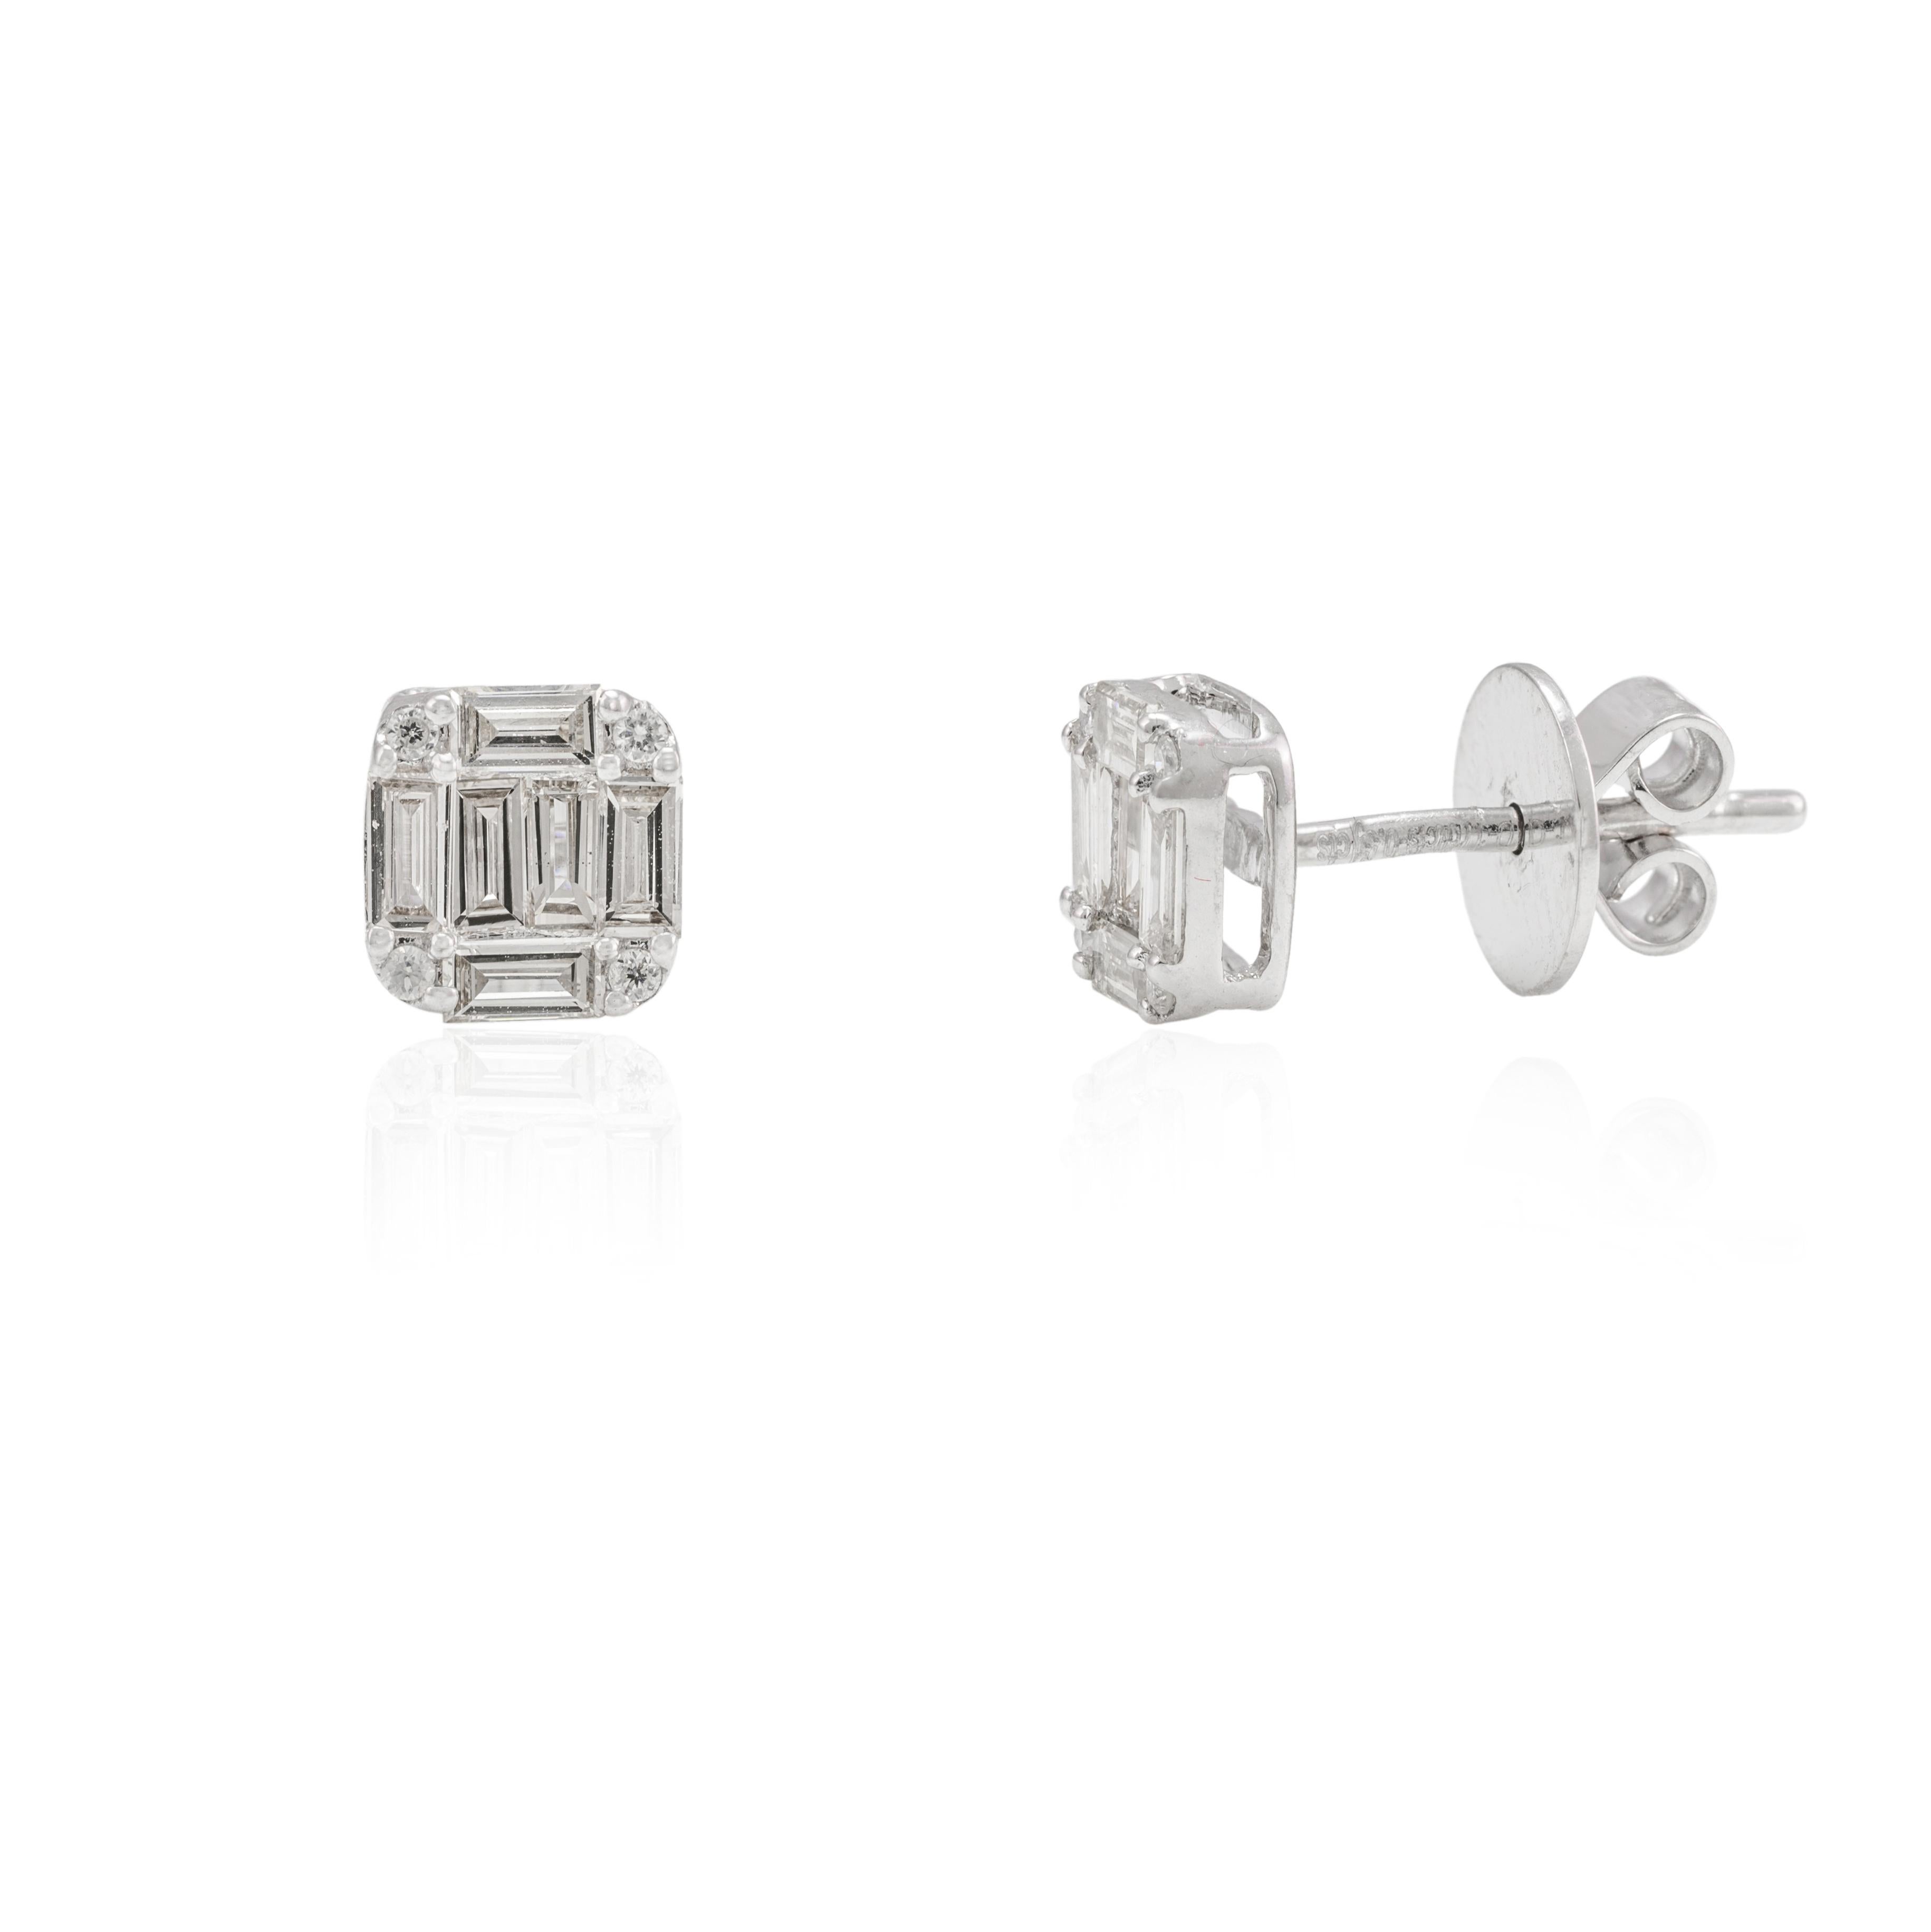 Mixed Cut Dainty Diamond Cluster Stud Earrings 18k Solid White Gold Valentine Gift For Her For Sale